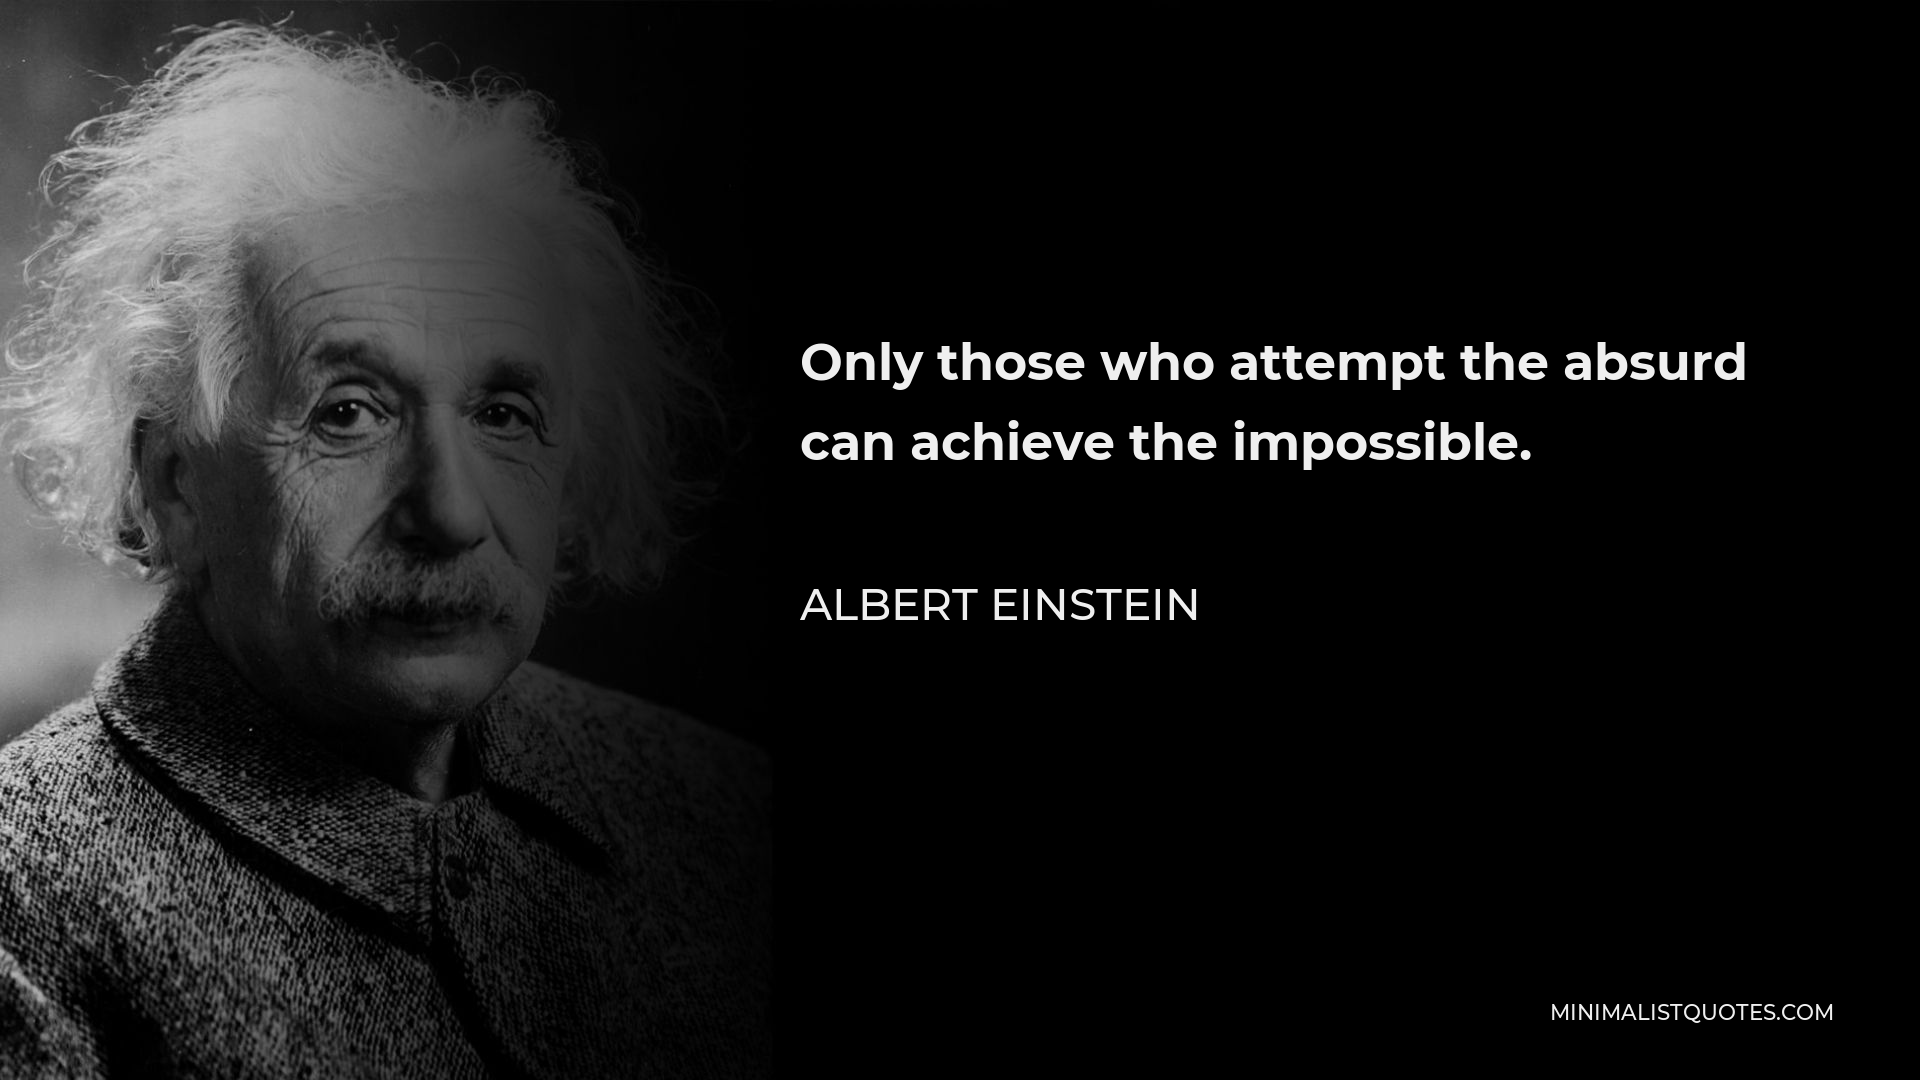 Albert Einstein Quote: Only those who attempt the absurd can achieve ...